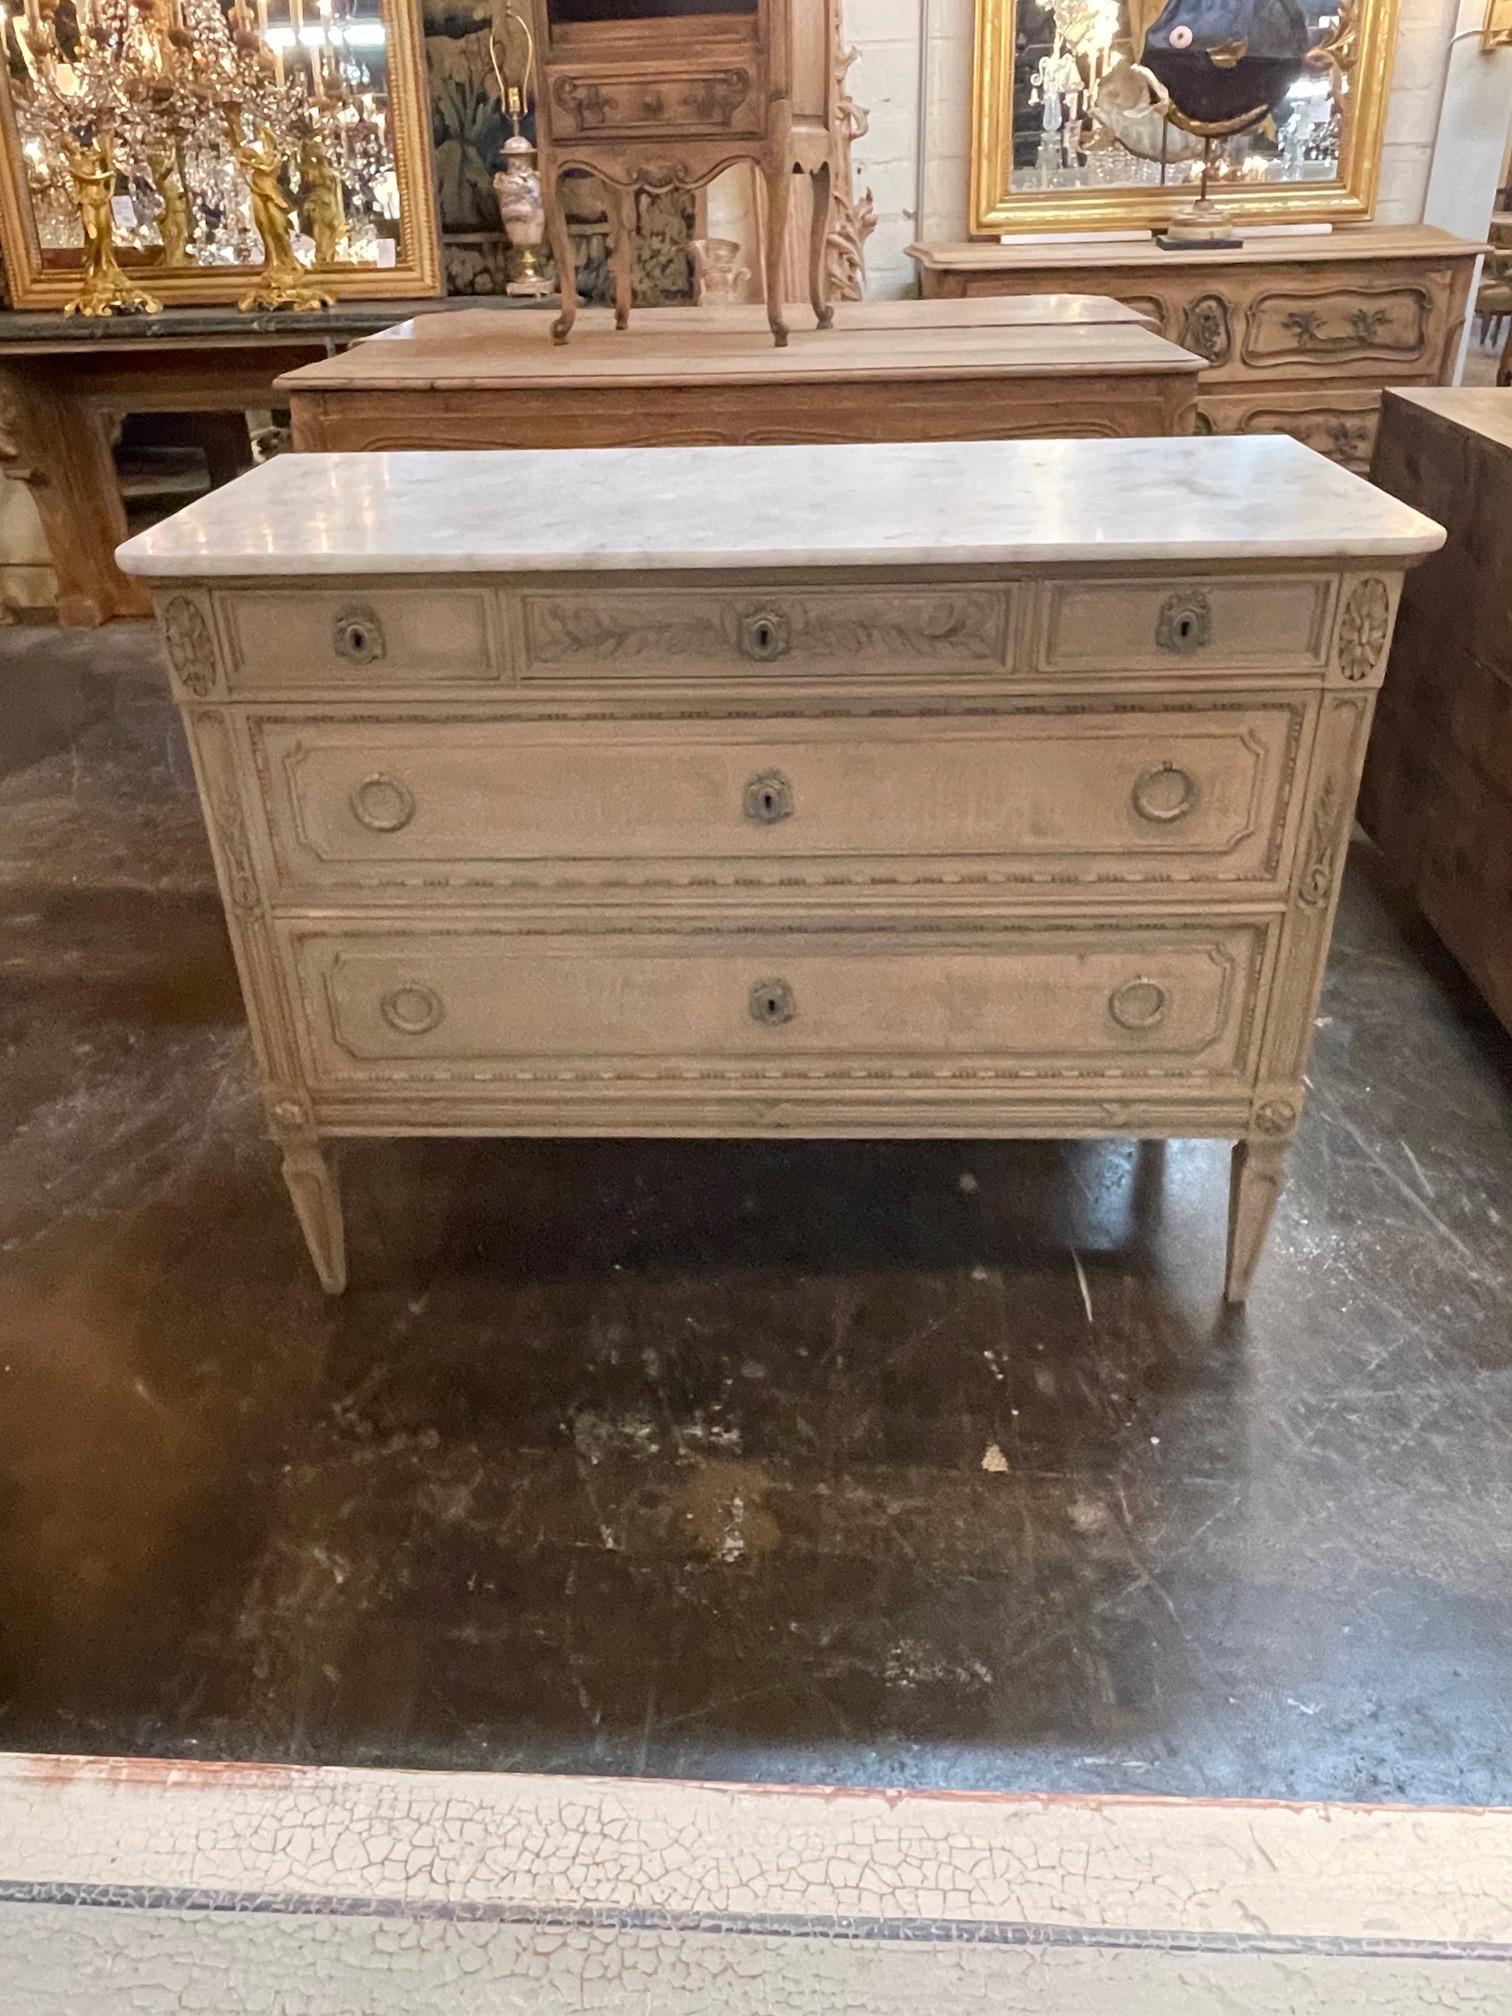 Lovely 19th century French Louis XVI style bleached commode with carrara marble top. Very fine patina and carvings. This piece also mixes well with a variety of style. Superb!